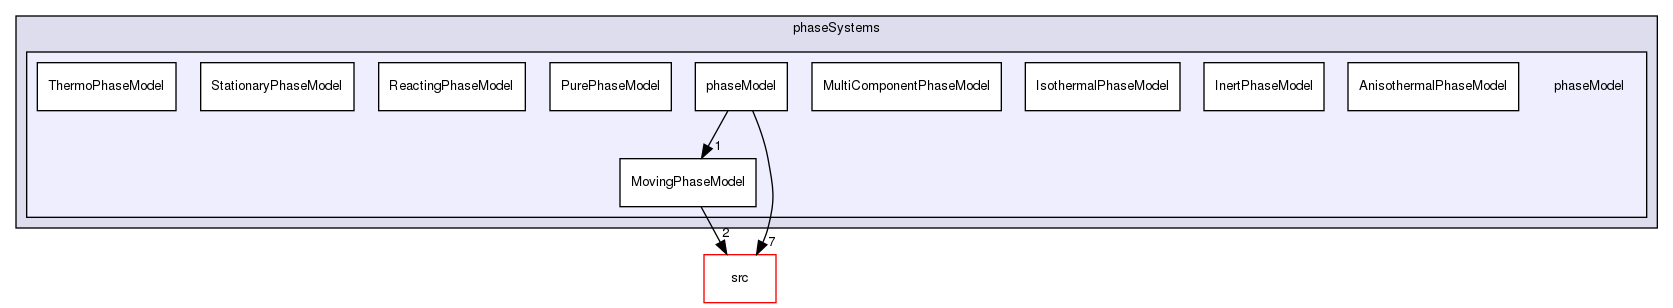 applications/solvers/multiphase/multiphaseEulerFoam/phaseSystems/phaseModel